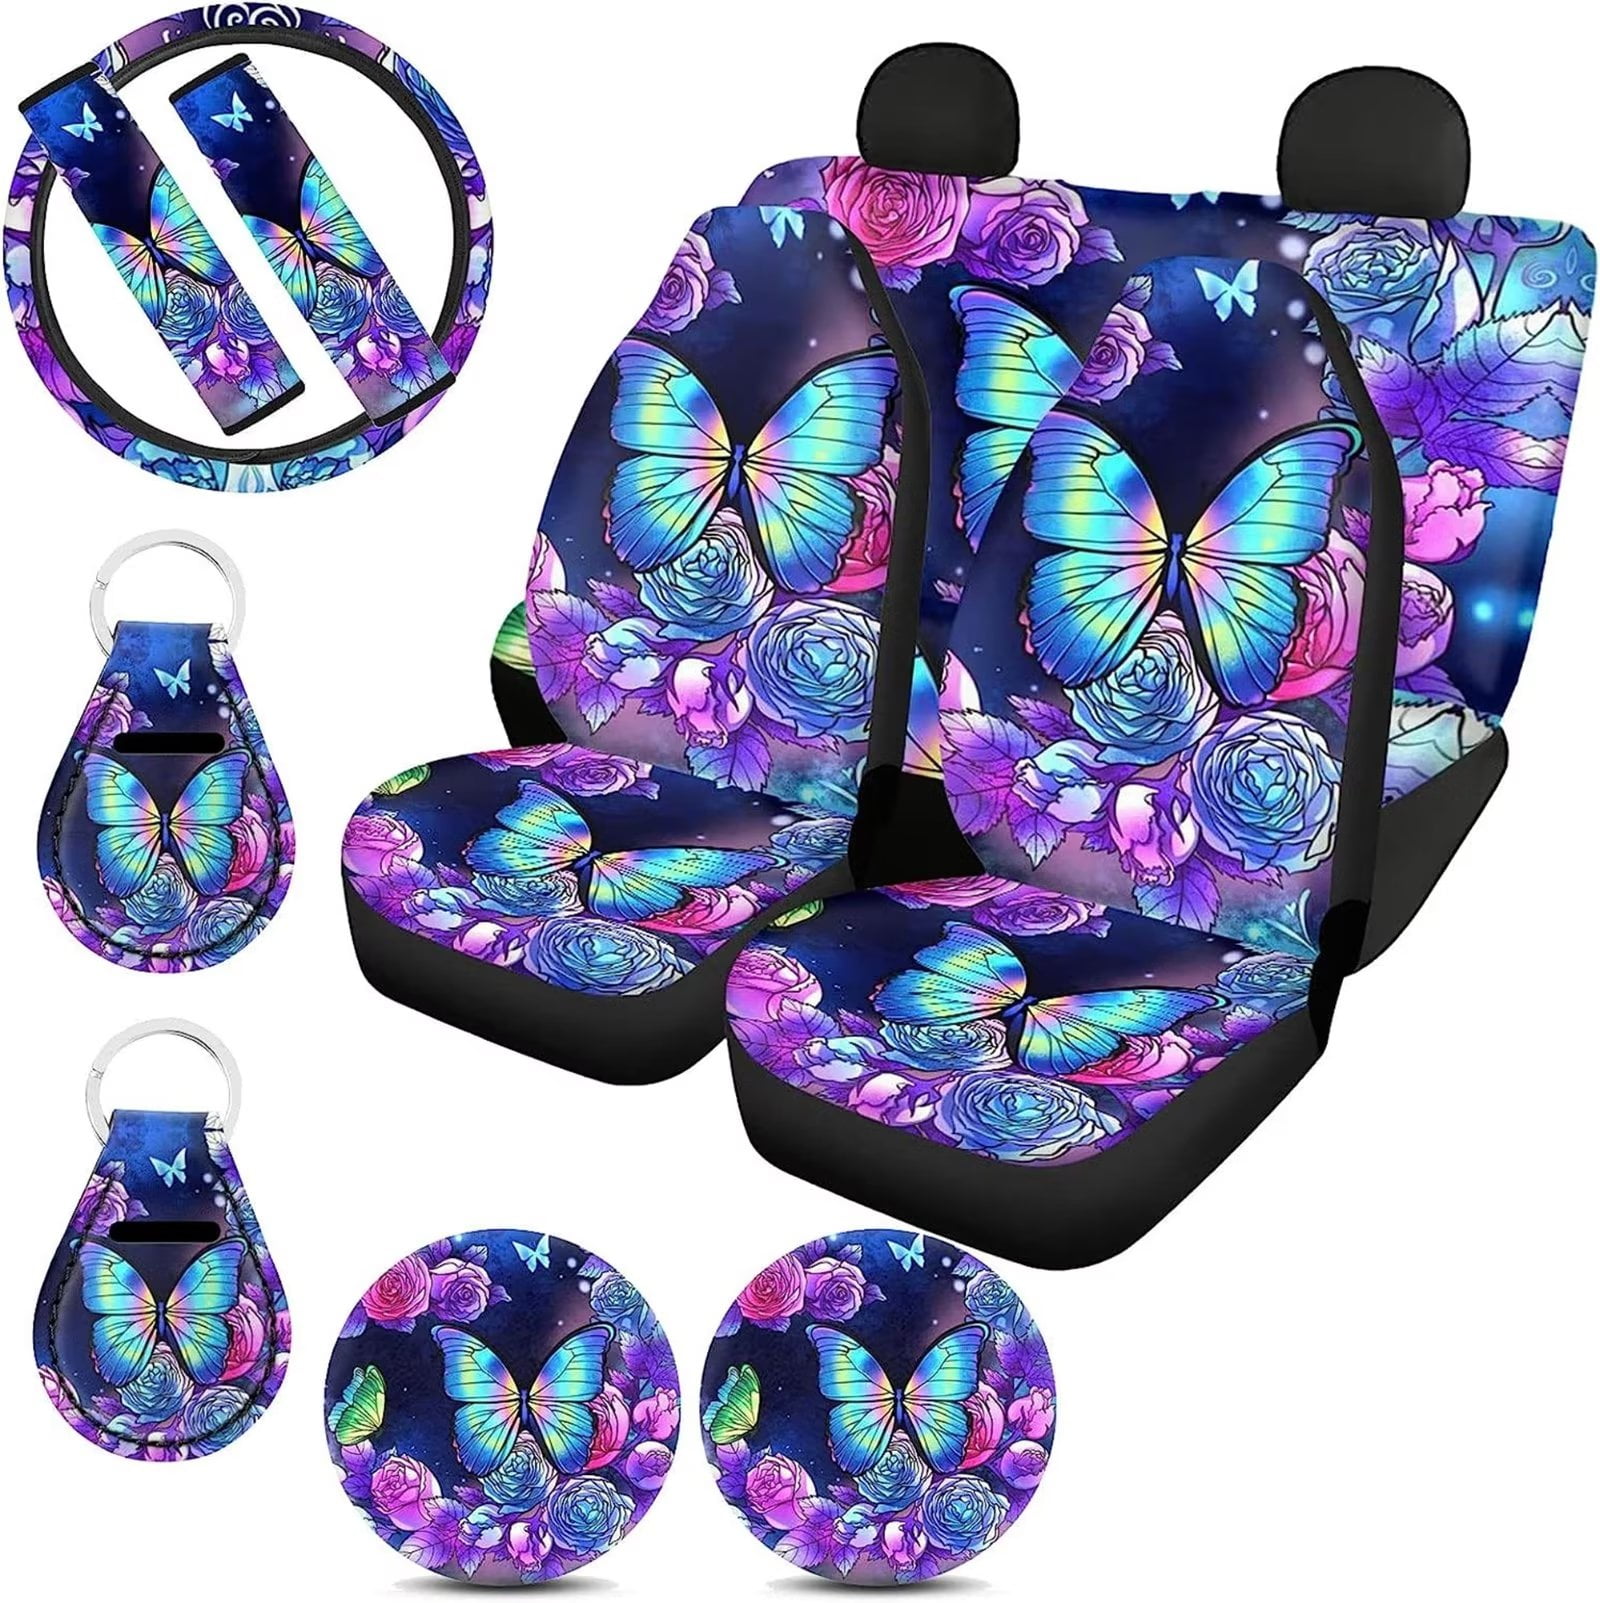 Luxurious Purple Rose Print Car Seat Cushions - Comfort and Style for Your  Vehicle!